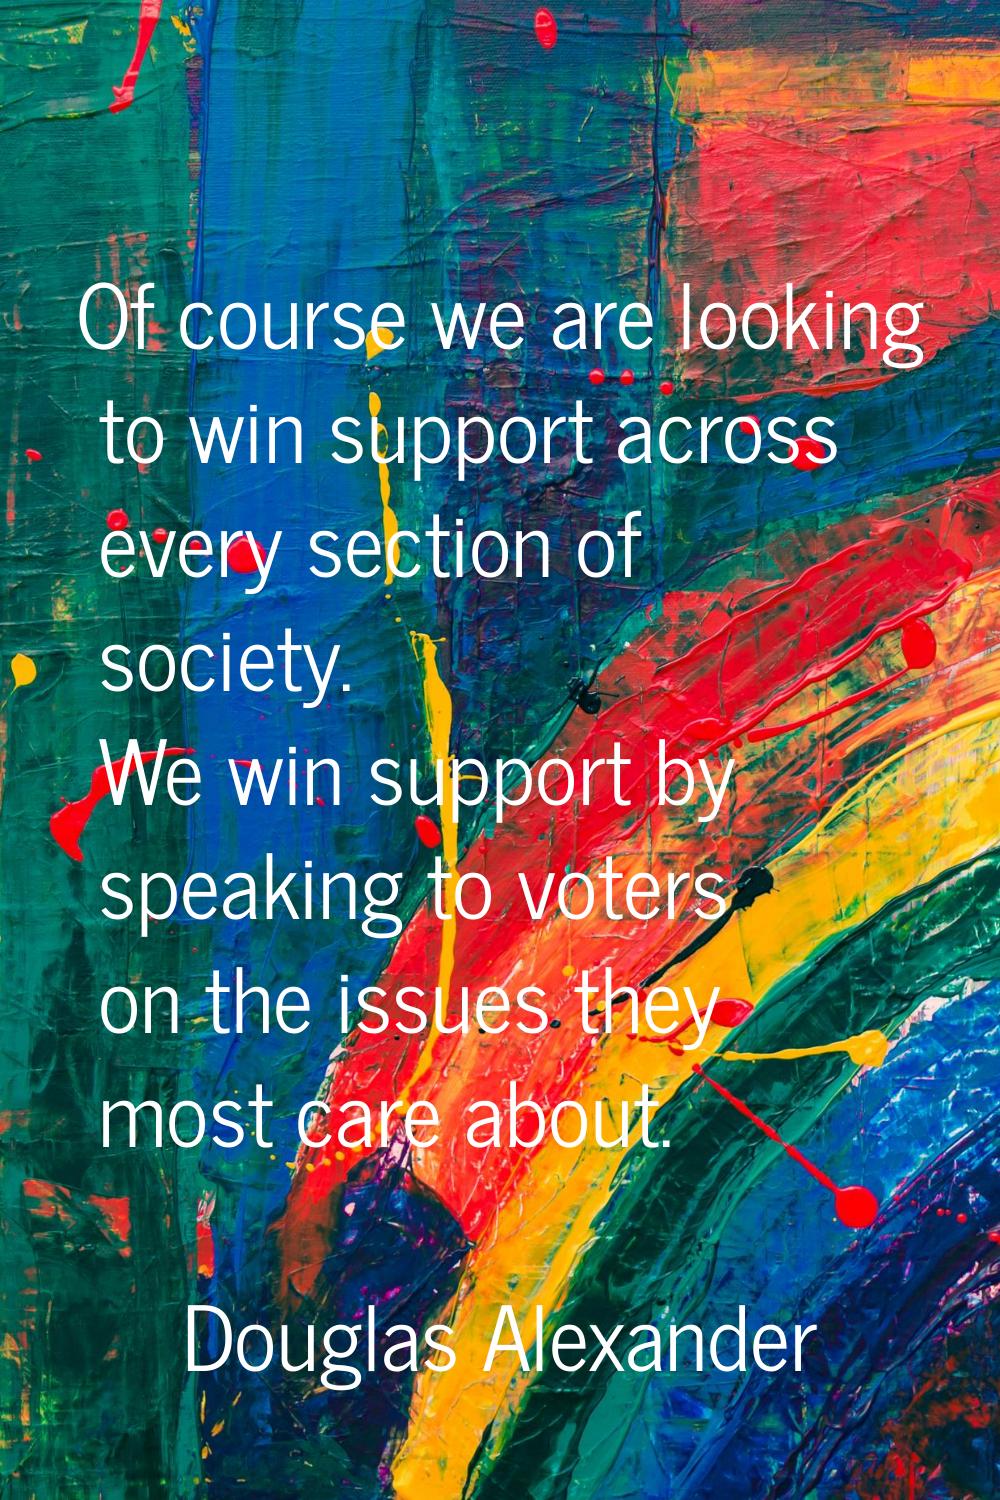 Of course we are looking to win support across every section of society. We win support by speaking